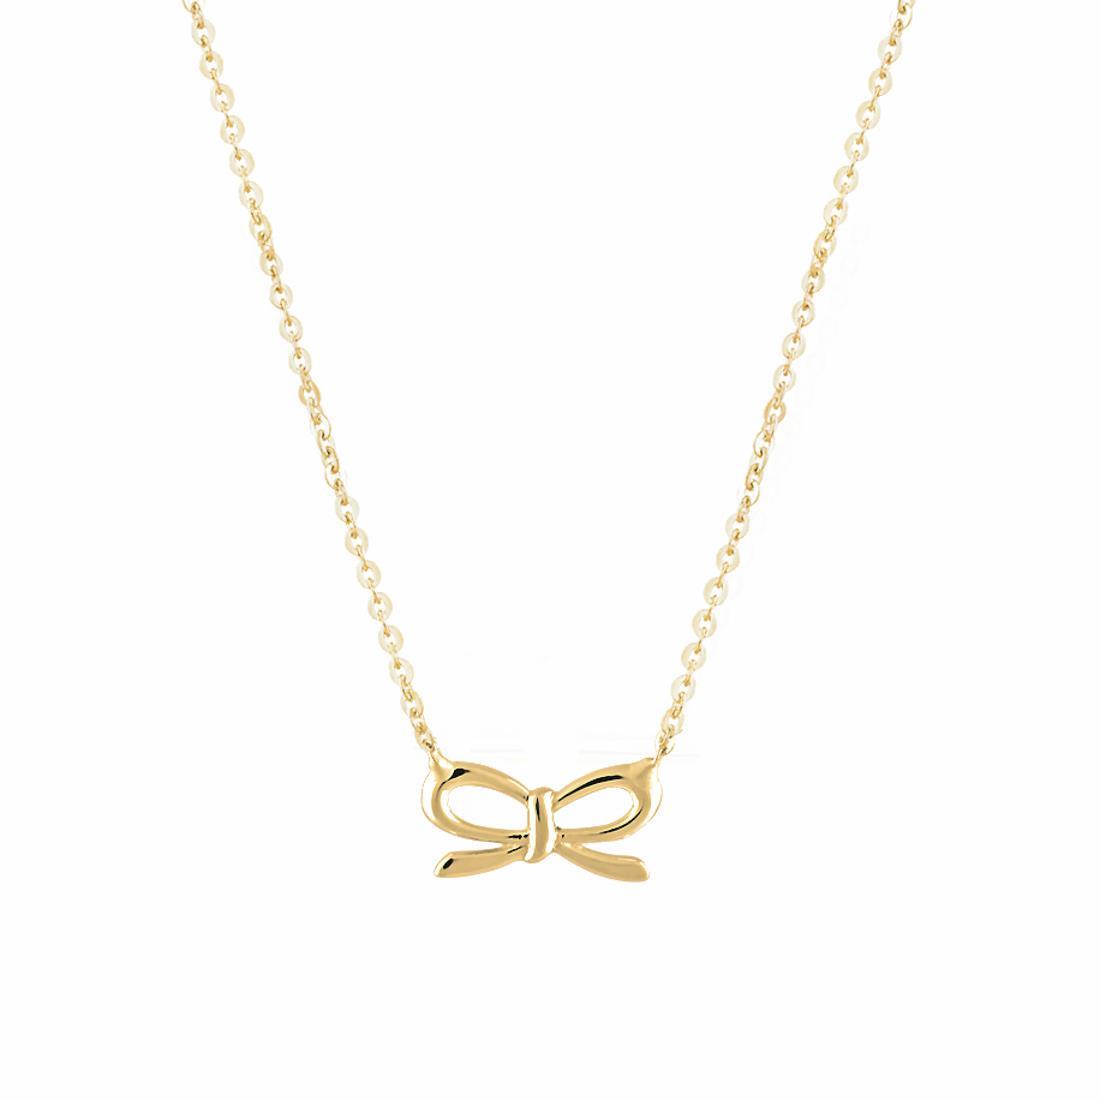 Gold necklace with bow pendant - ORO&CO